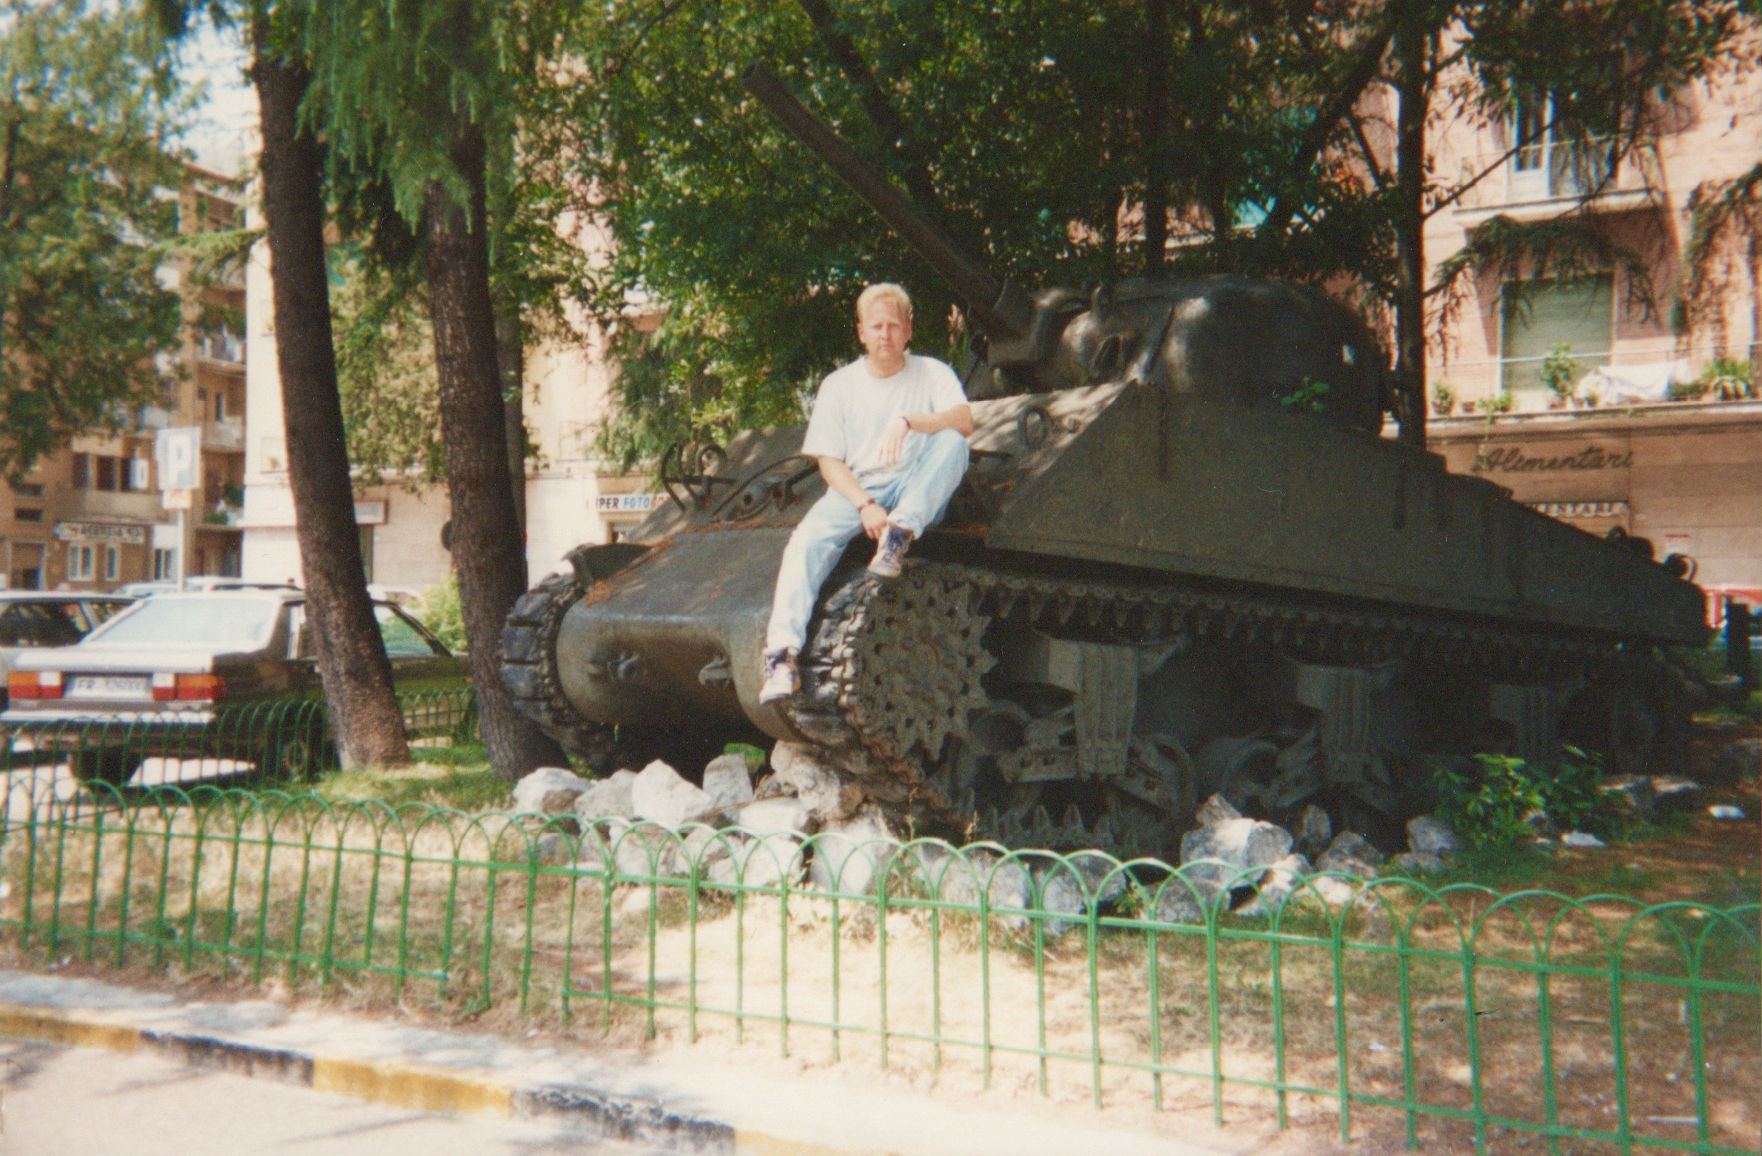 Tom on a Sherman tank in Monte Cassino, Italy. One of the highlights of my life visiting there.